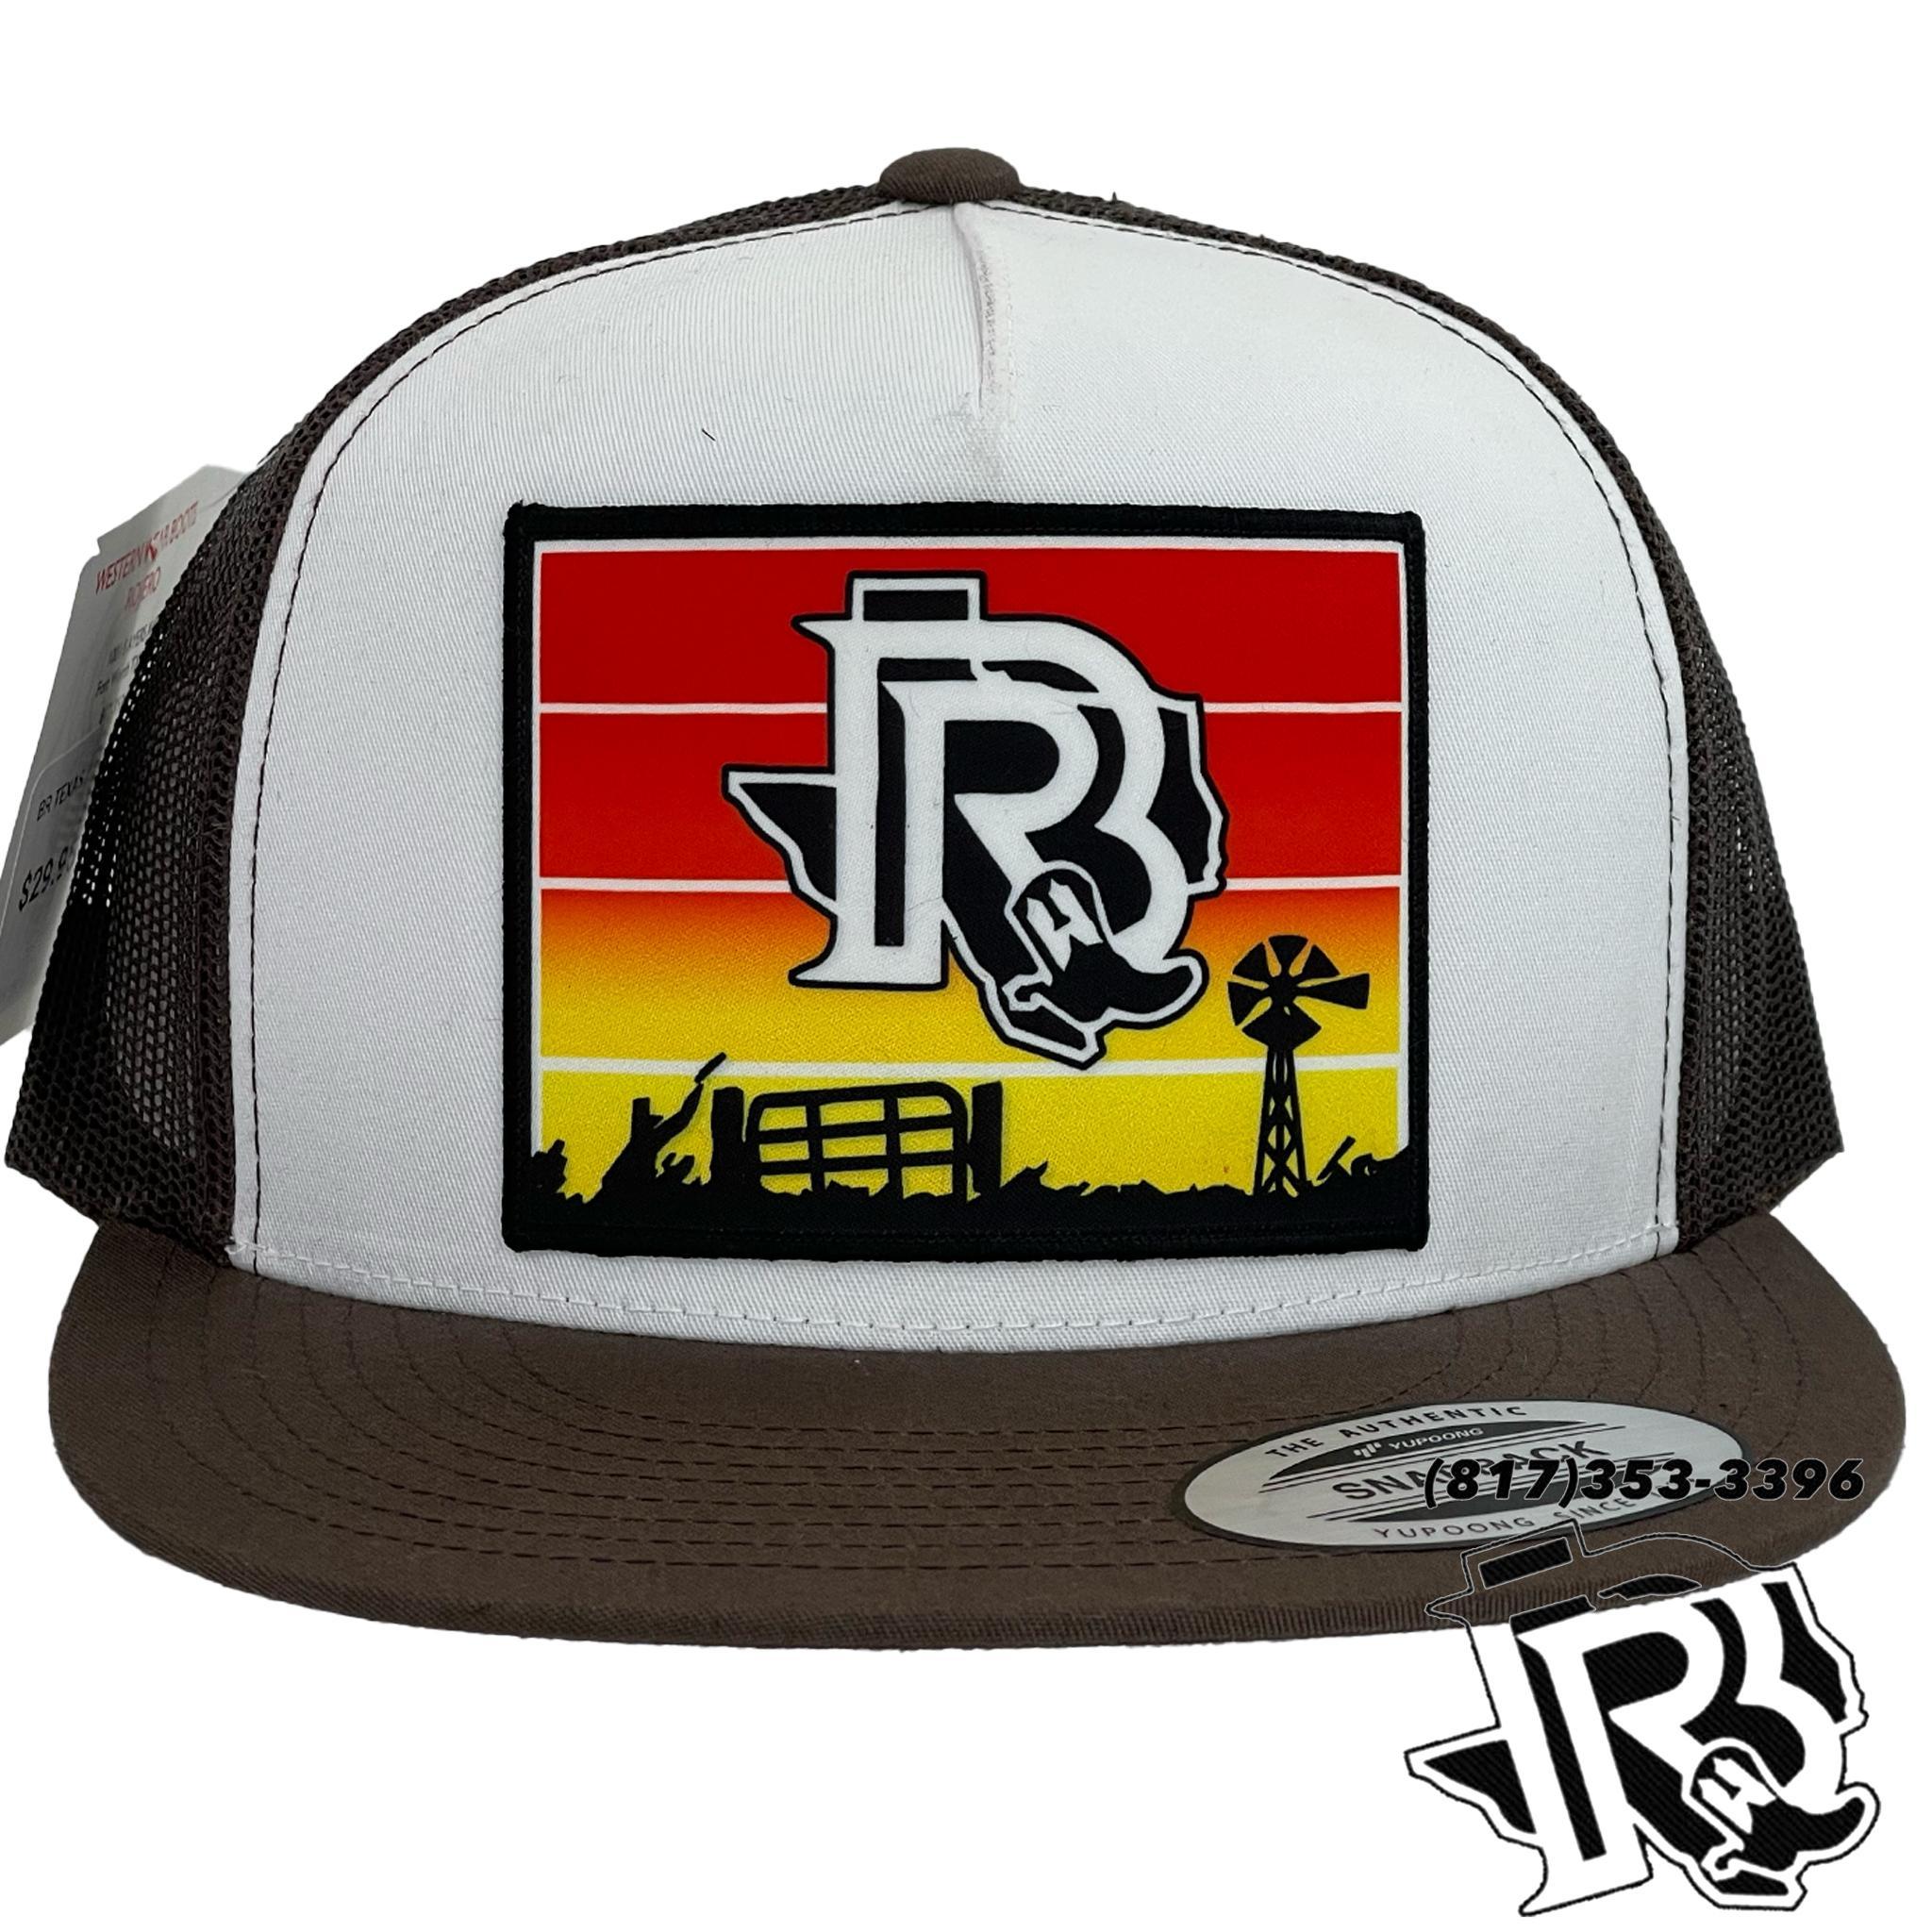 BR TEXAS SUNSET EDITION:  BROWN/WHITE/BROWN CAP